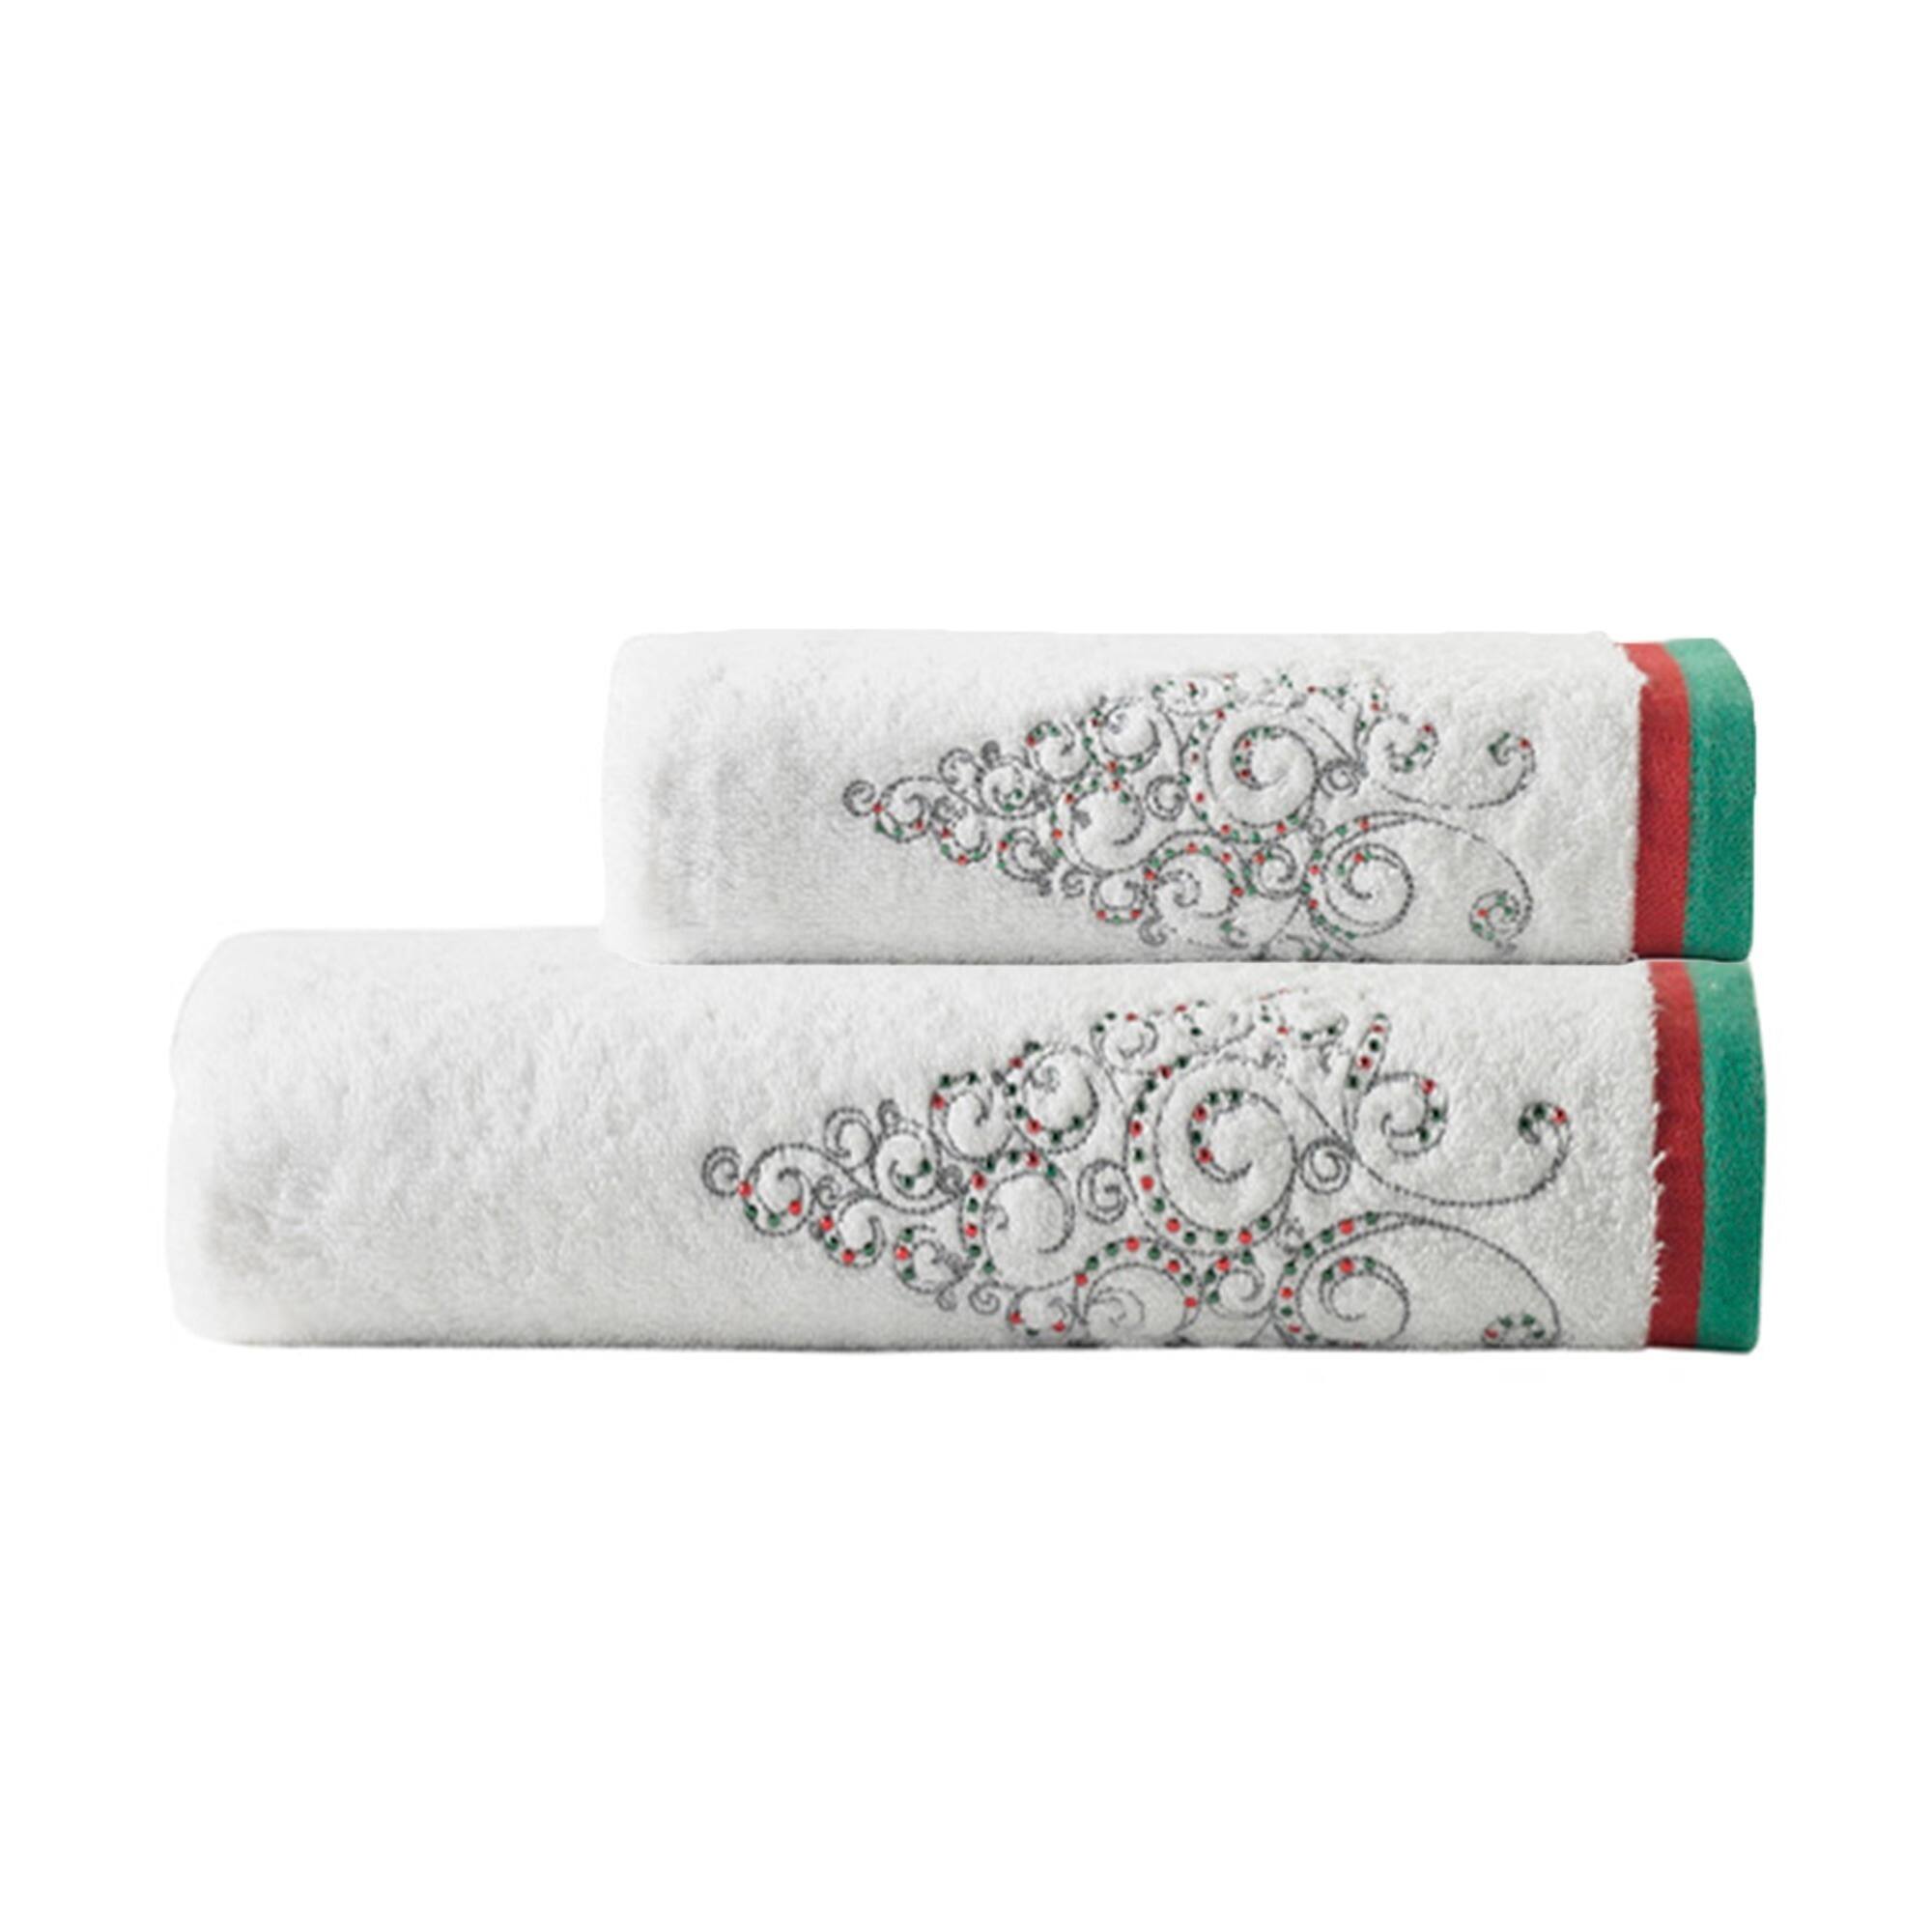 Enchante Christmas Tree Embroidered 2-piece Hand Towel Set - 16x28 inches